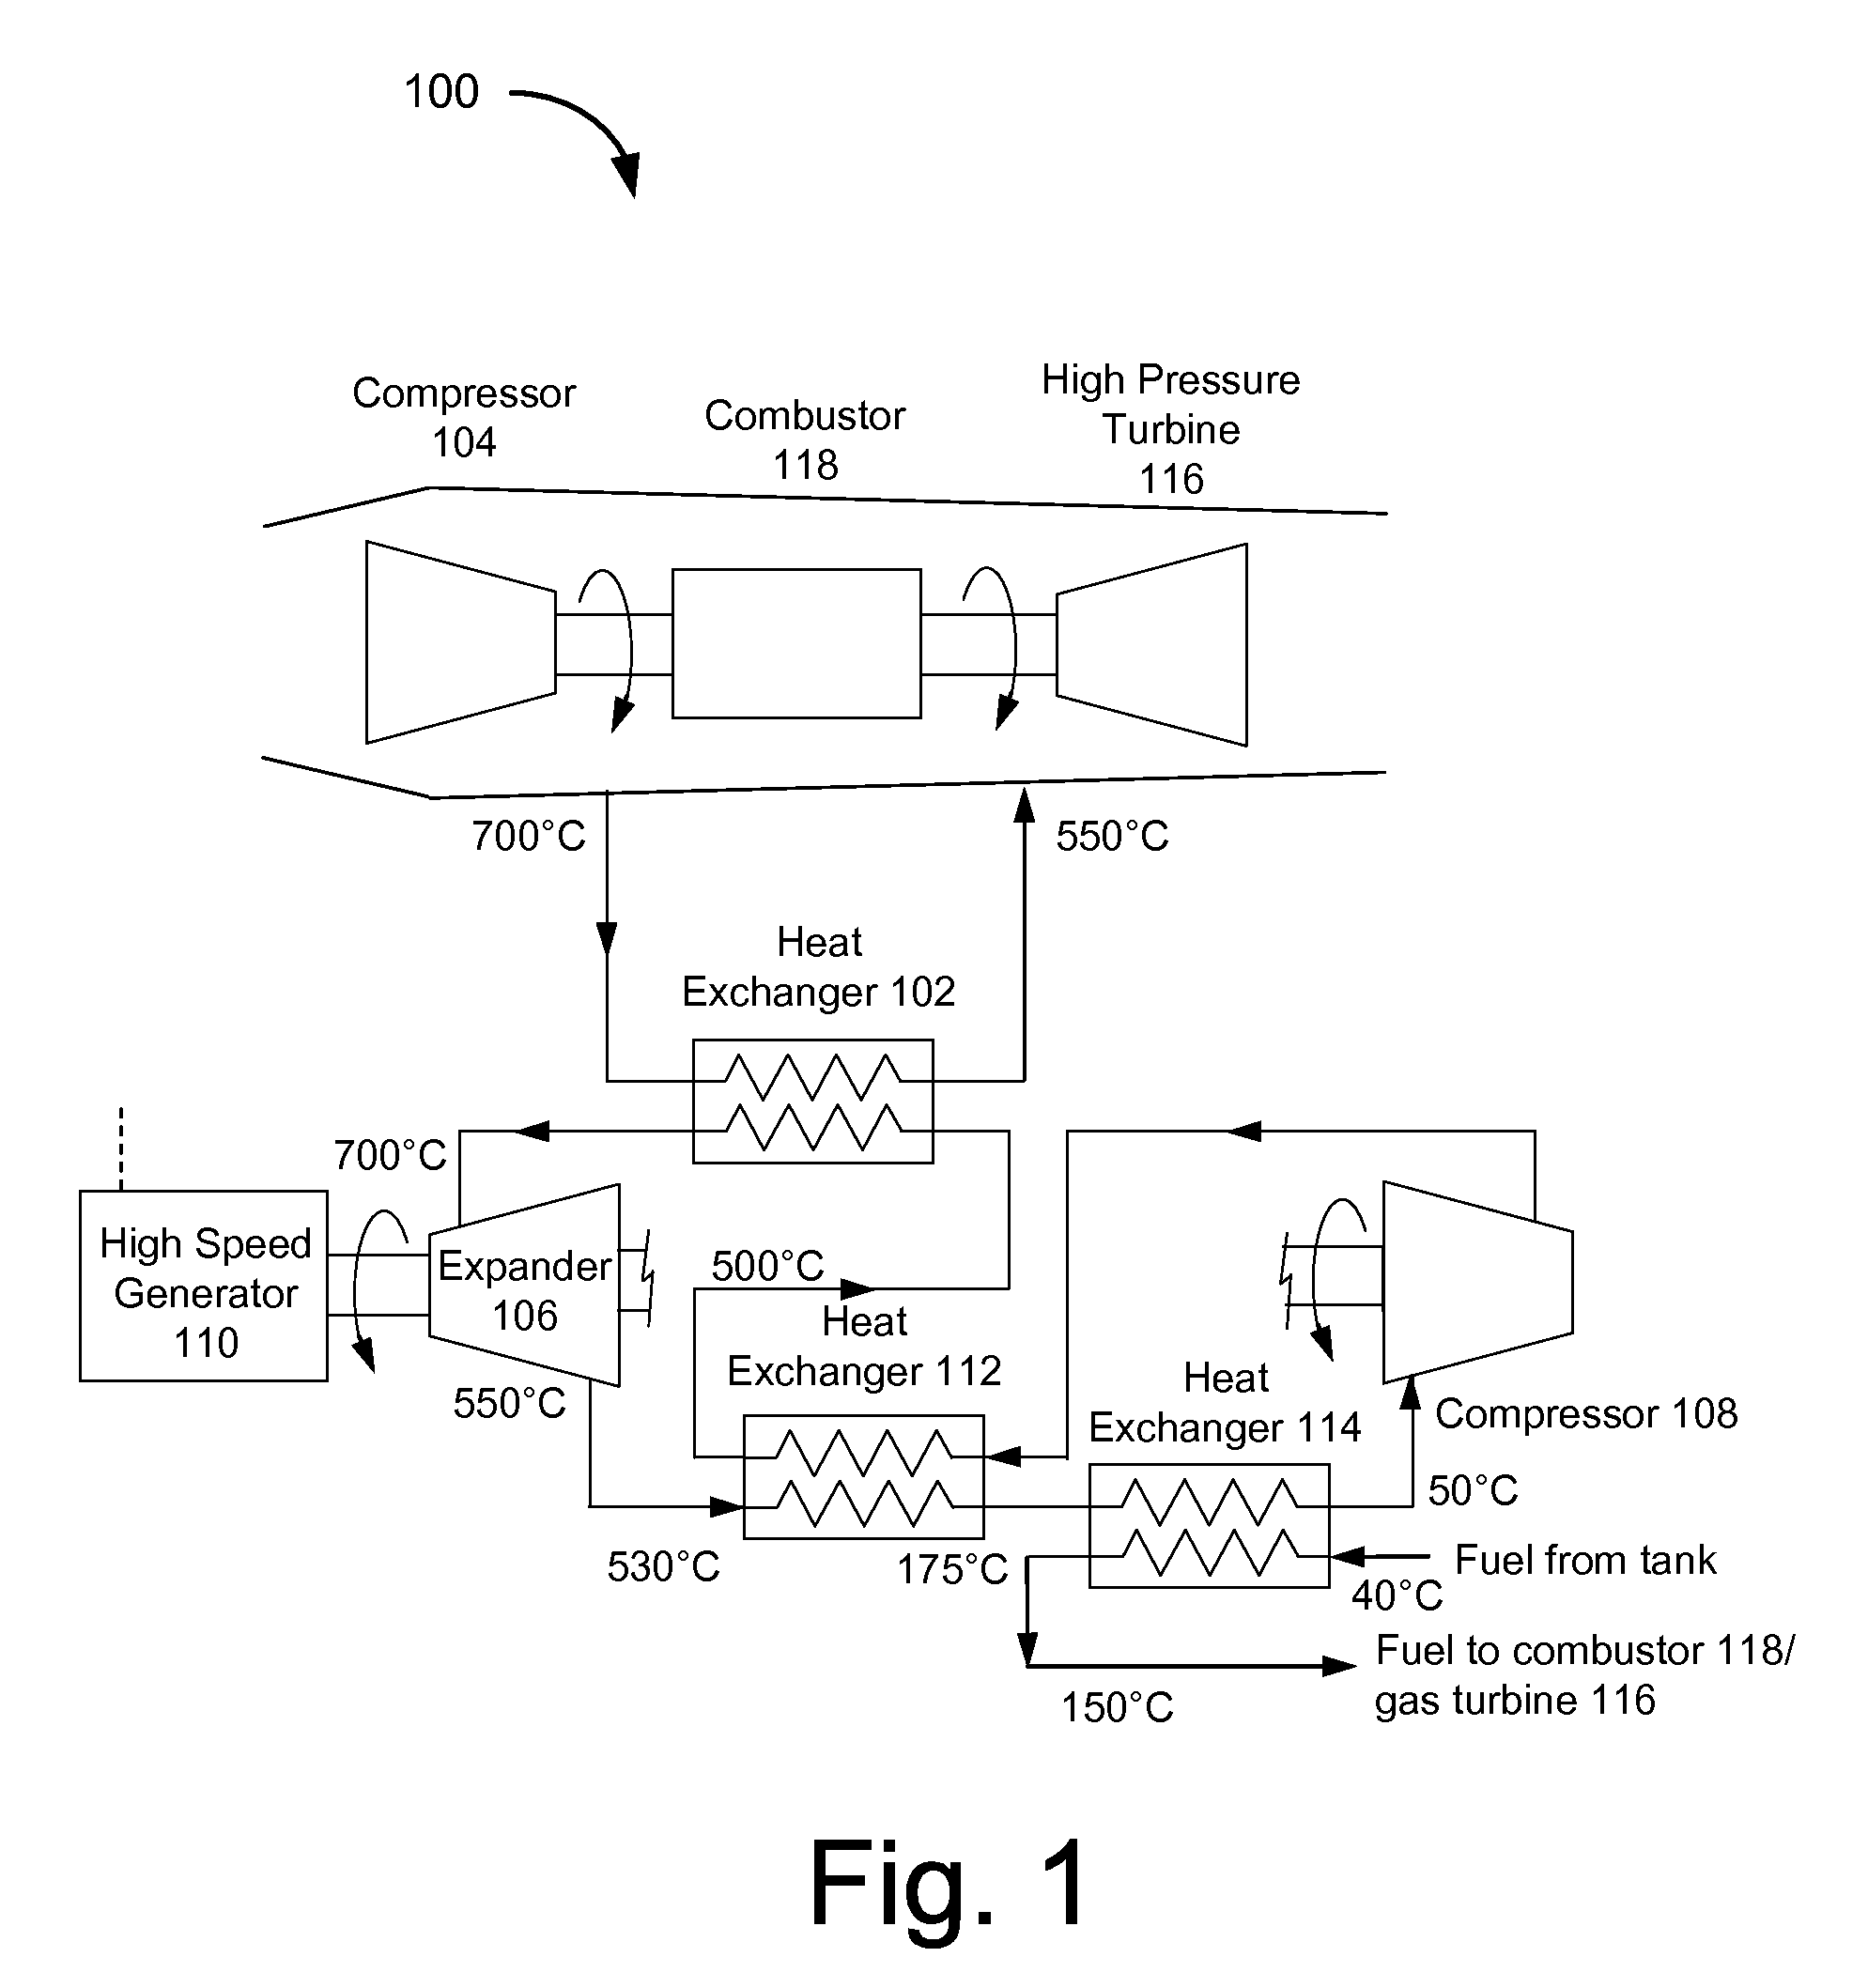 System and method for managing thermal issues in gas turbine engines